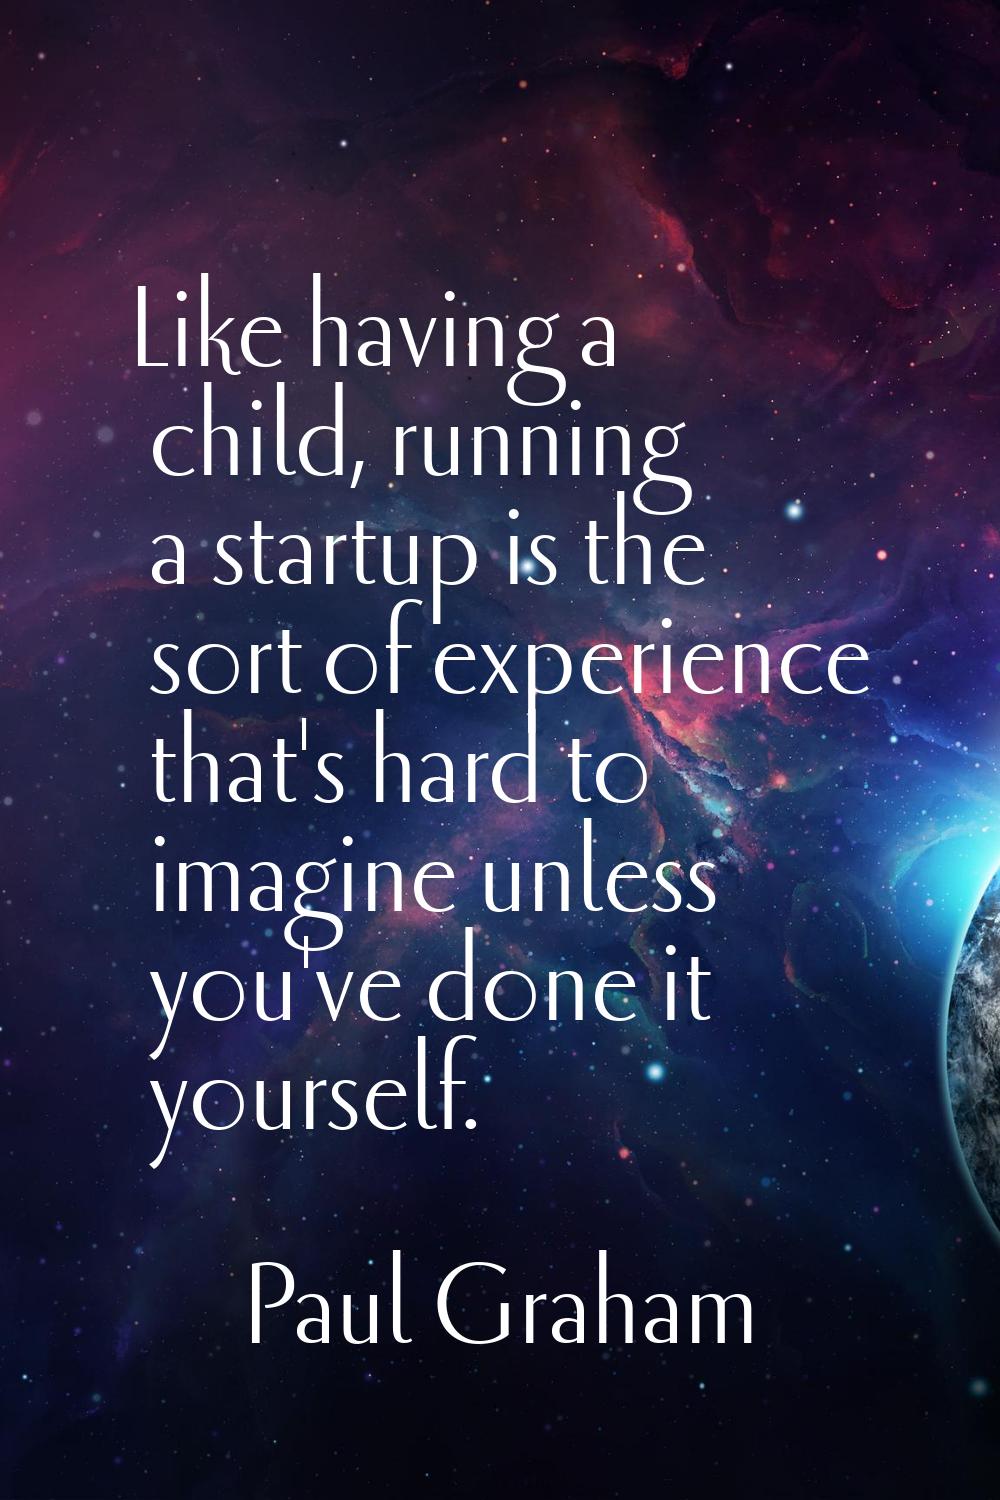 Like having a child, running a startup is the sort of experience that's hard to imagine unless you'